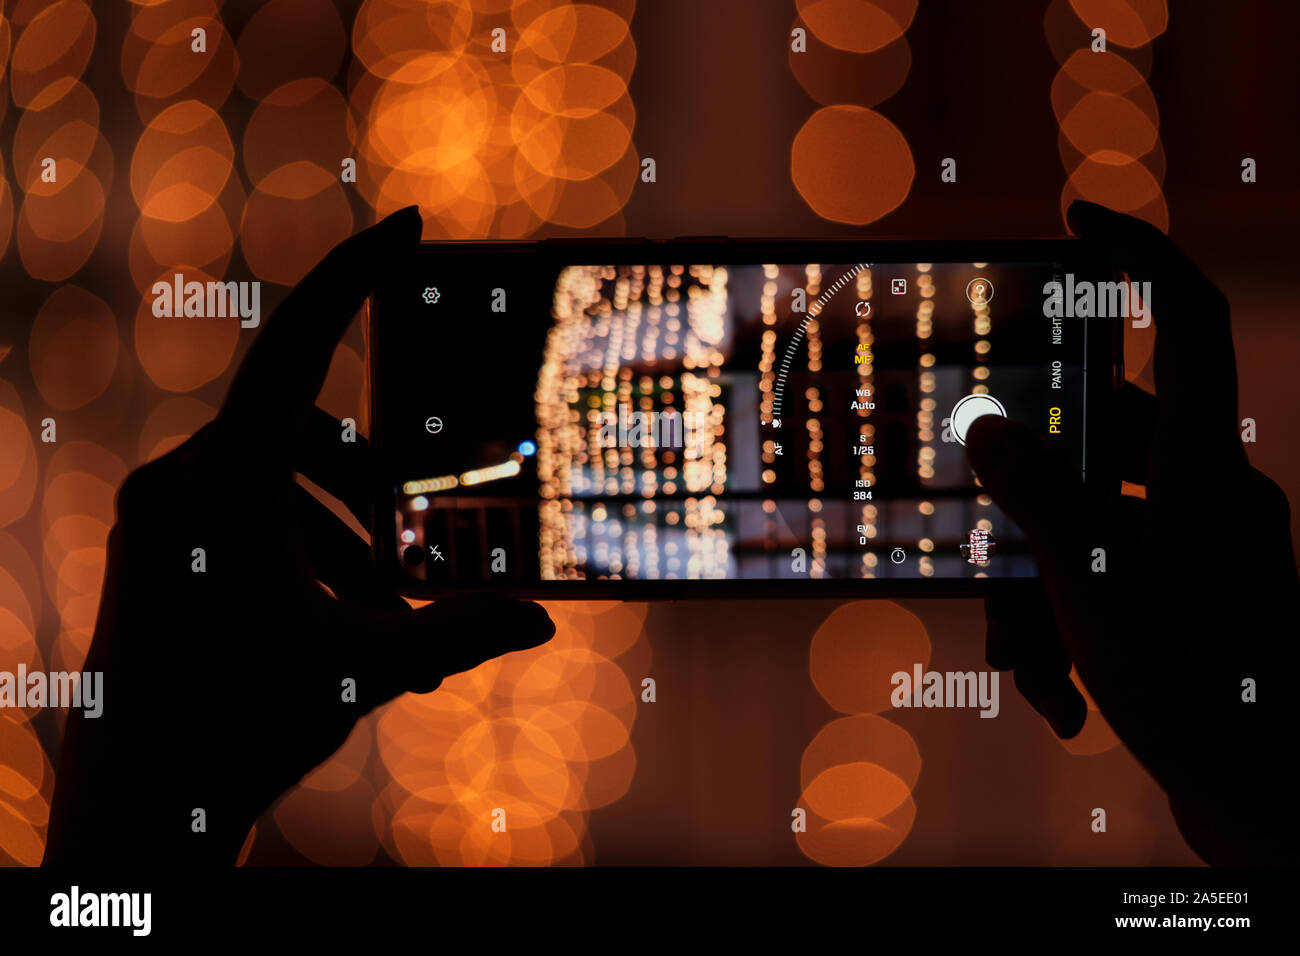 Person holding smart phone & capturing photo of festive decorations at night. Background image for Diwali festival, street mobile photography. Stock Photo